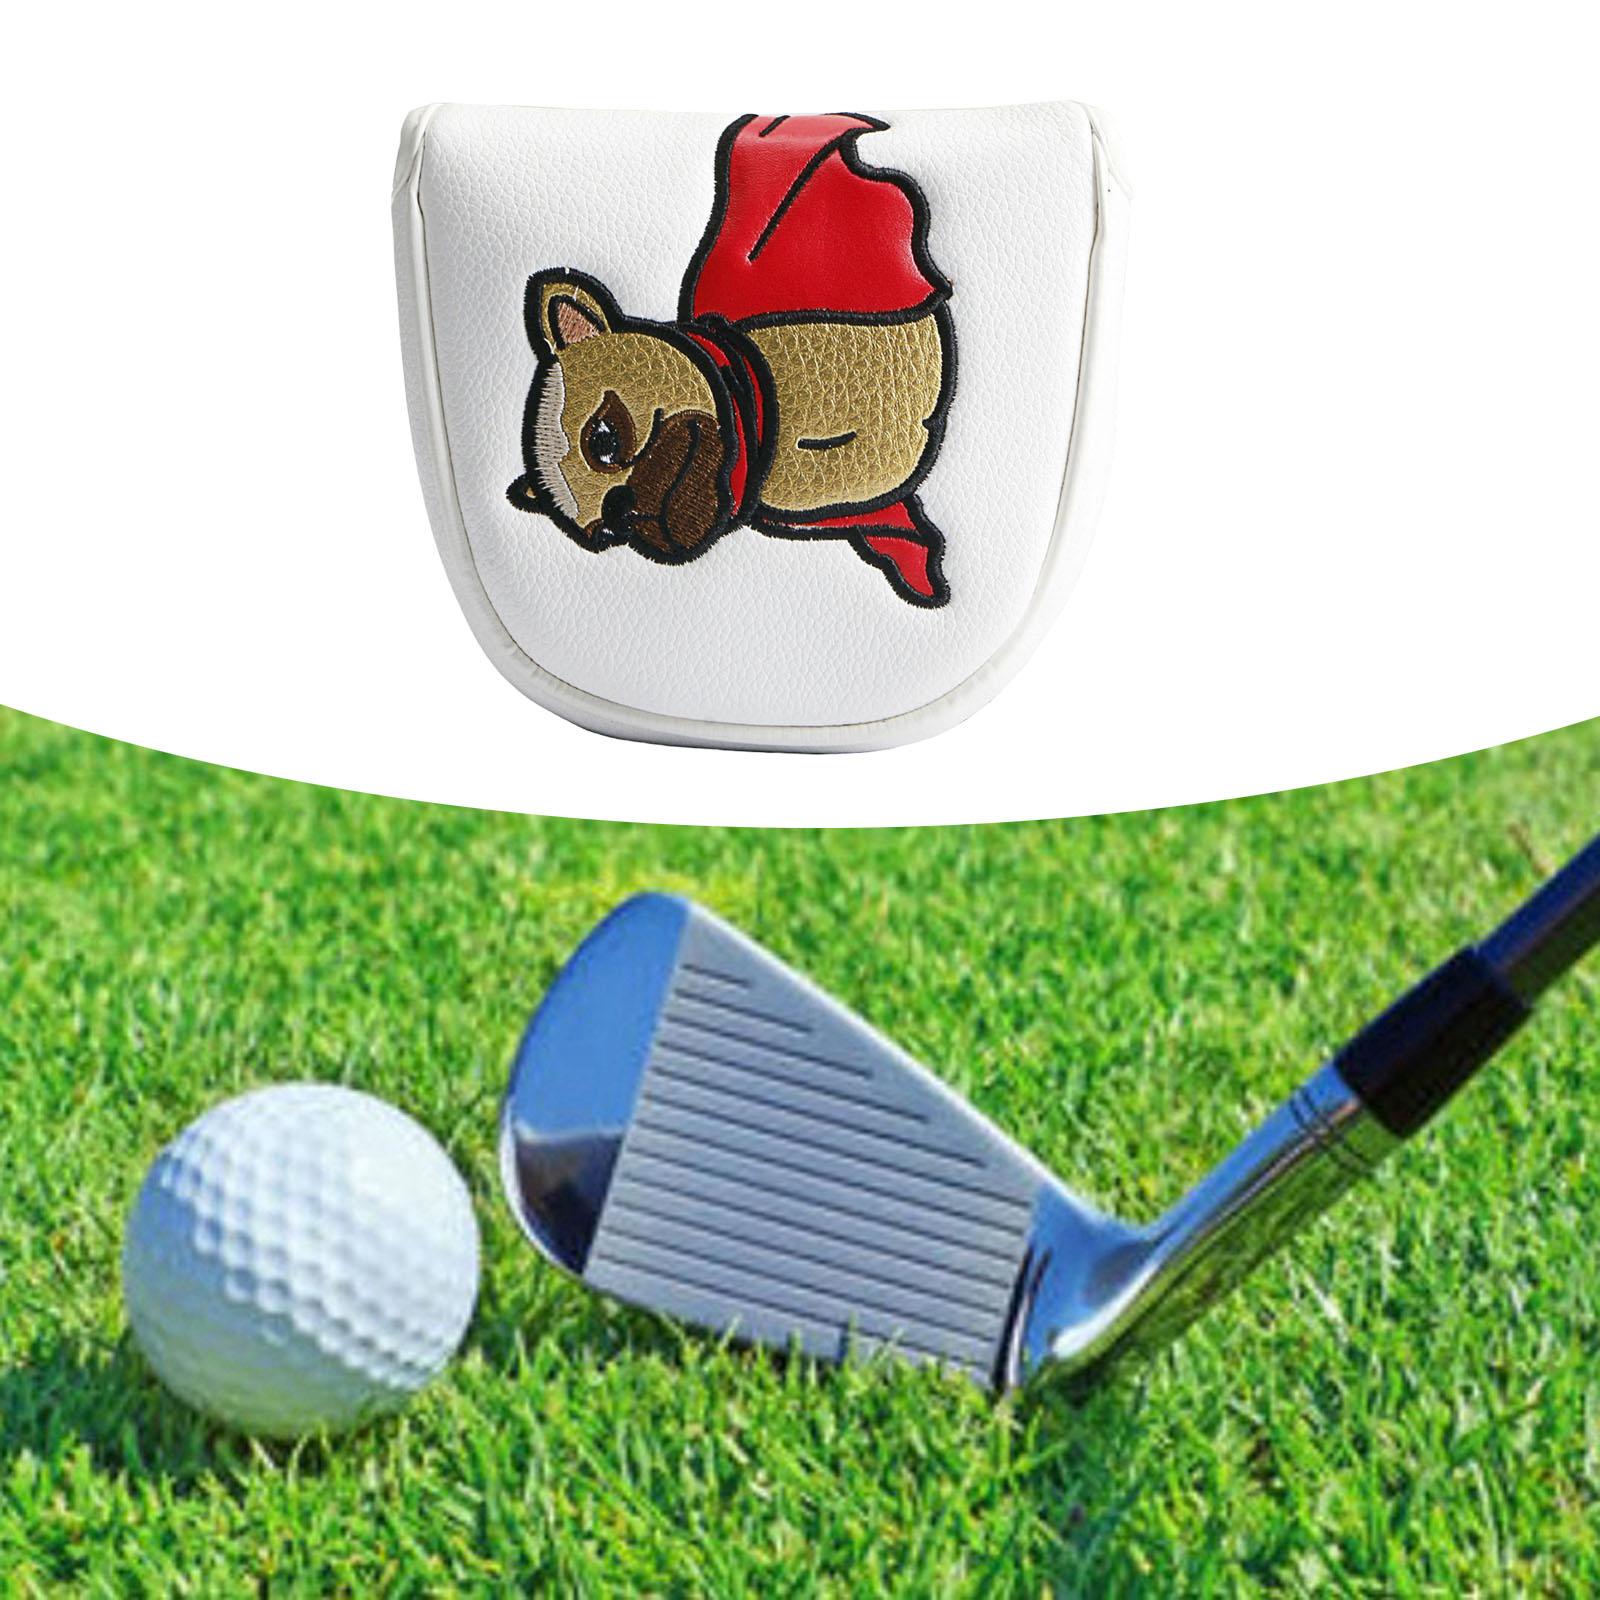 Golf Mallet Putter Head Cover Golf Supplies Fashion Protective Putter Covers Semicircle White